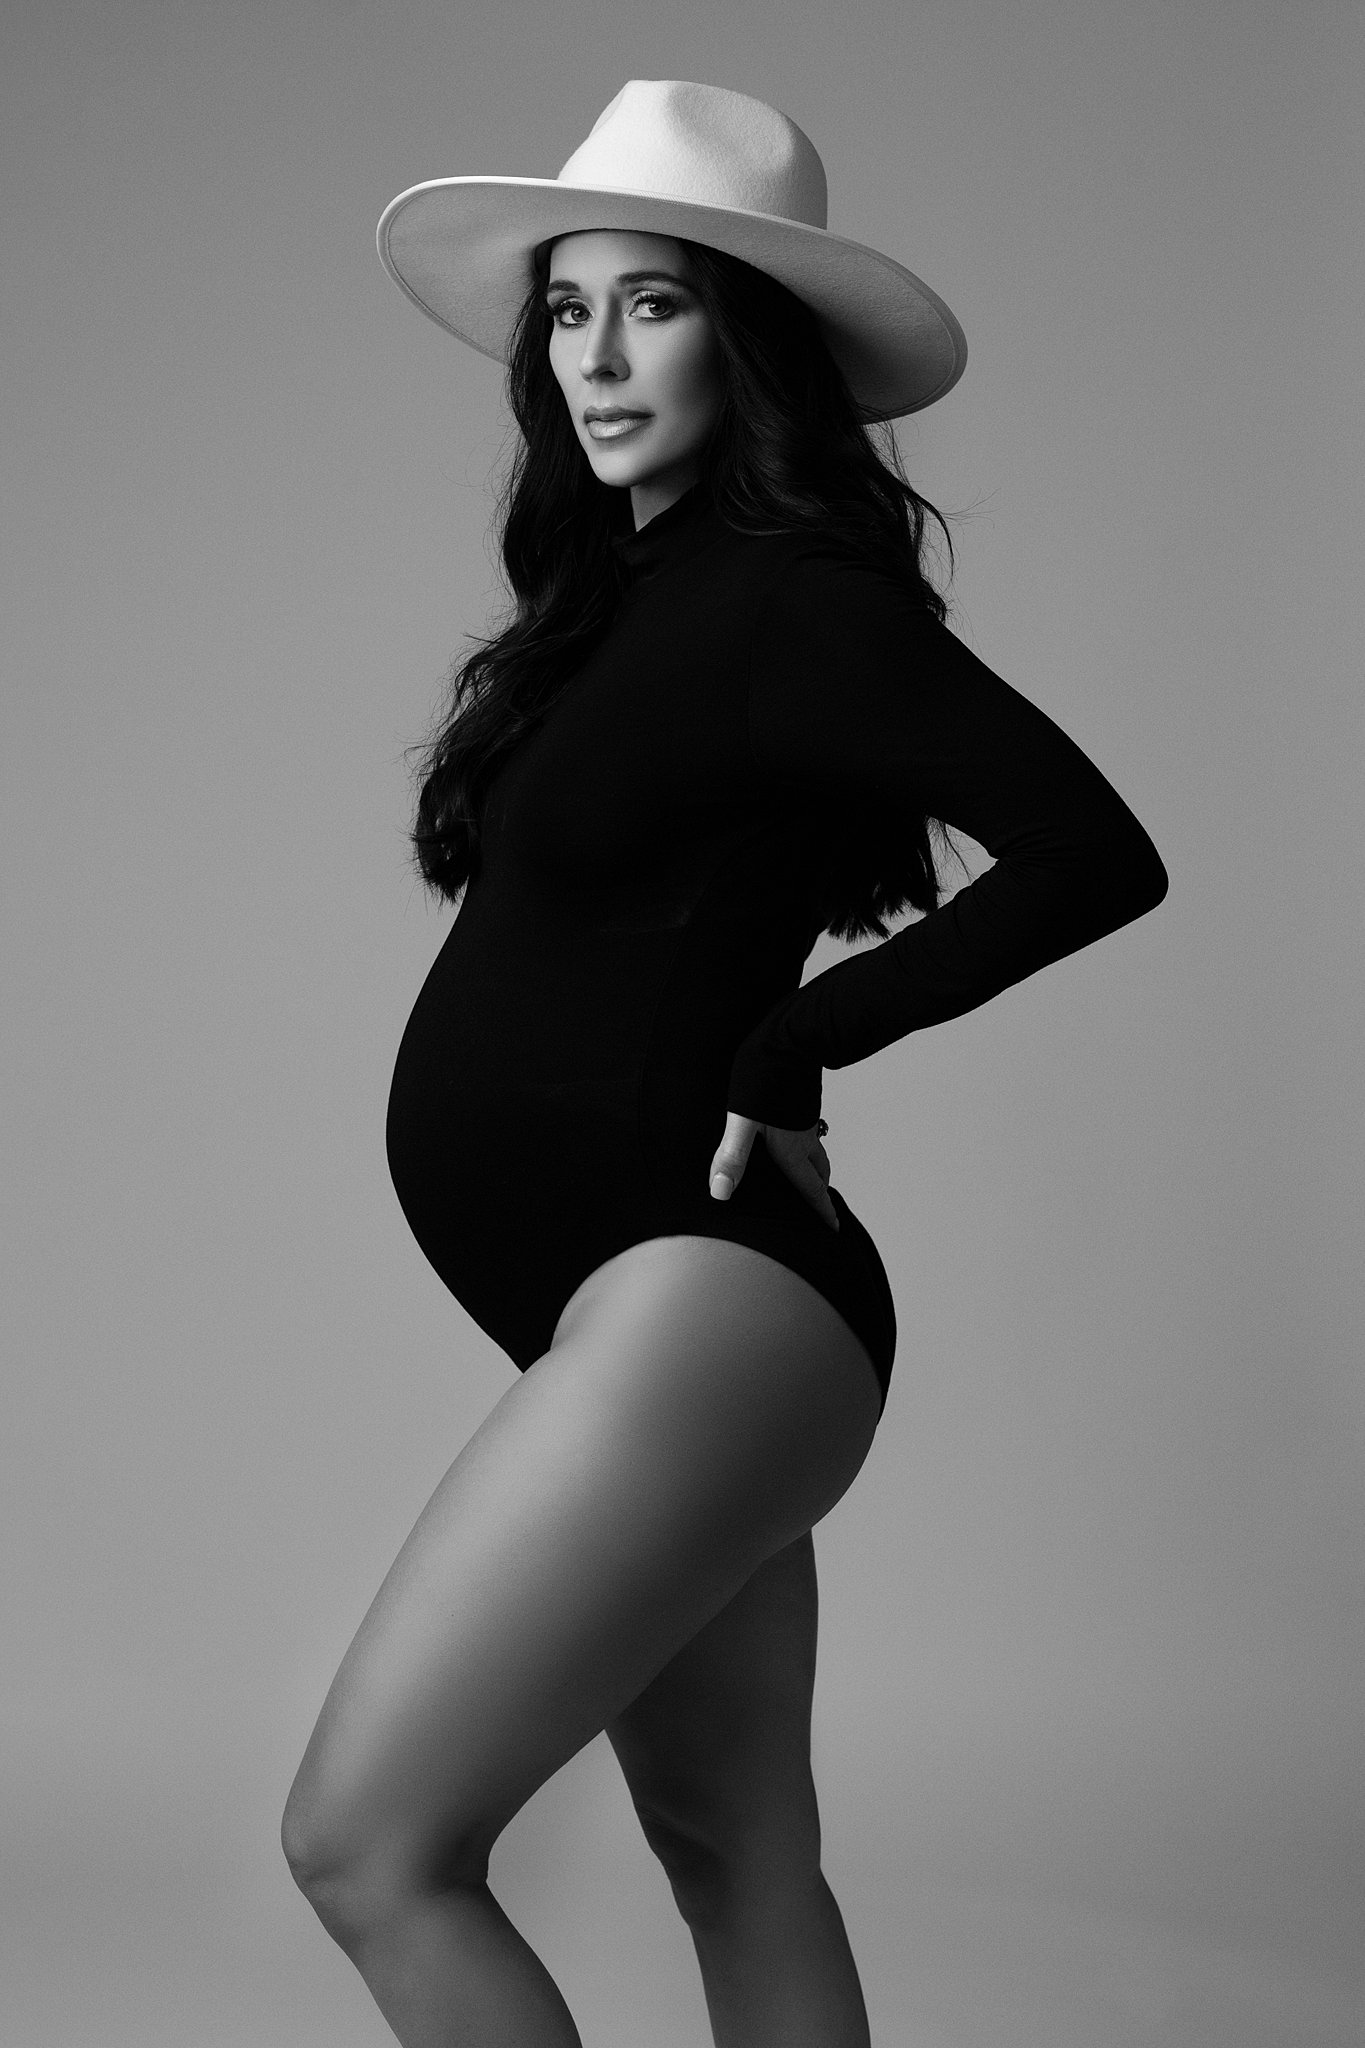 A pregnant woman stands in a studio with a hand on her back in a black one-piece suit sugarboo atlanta